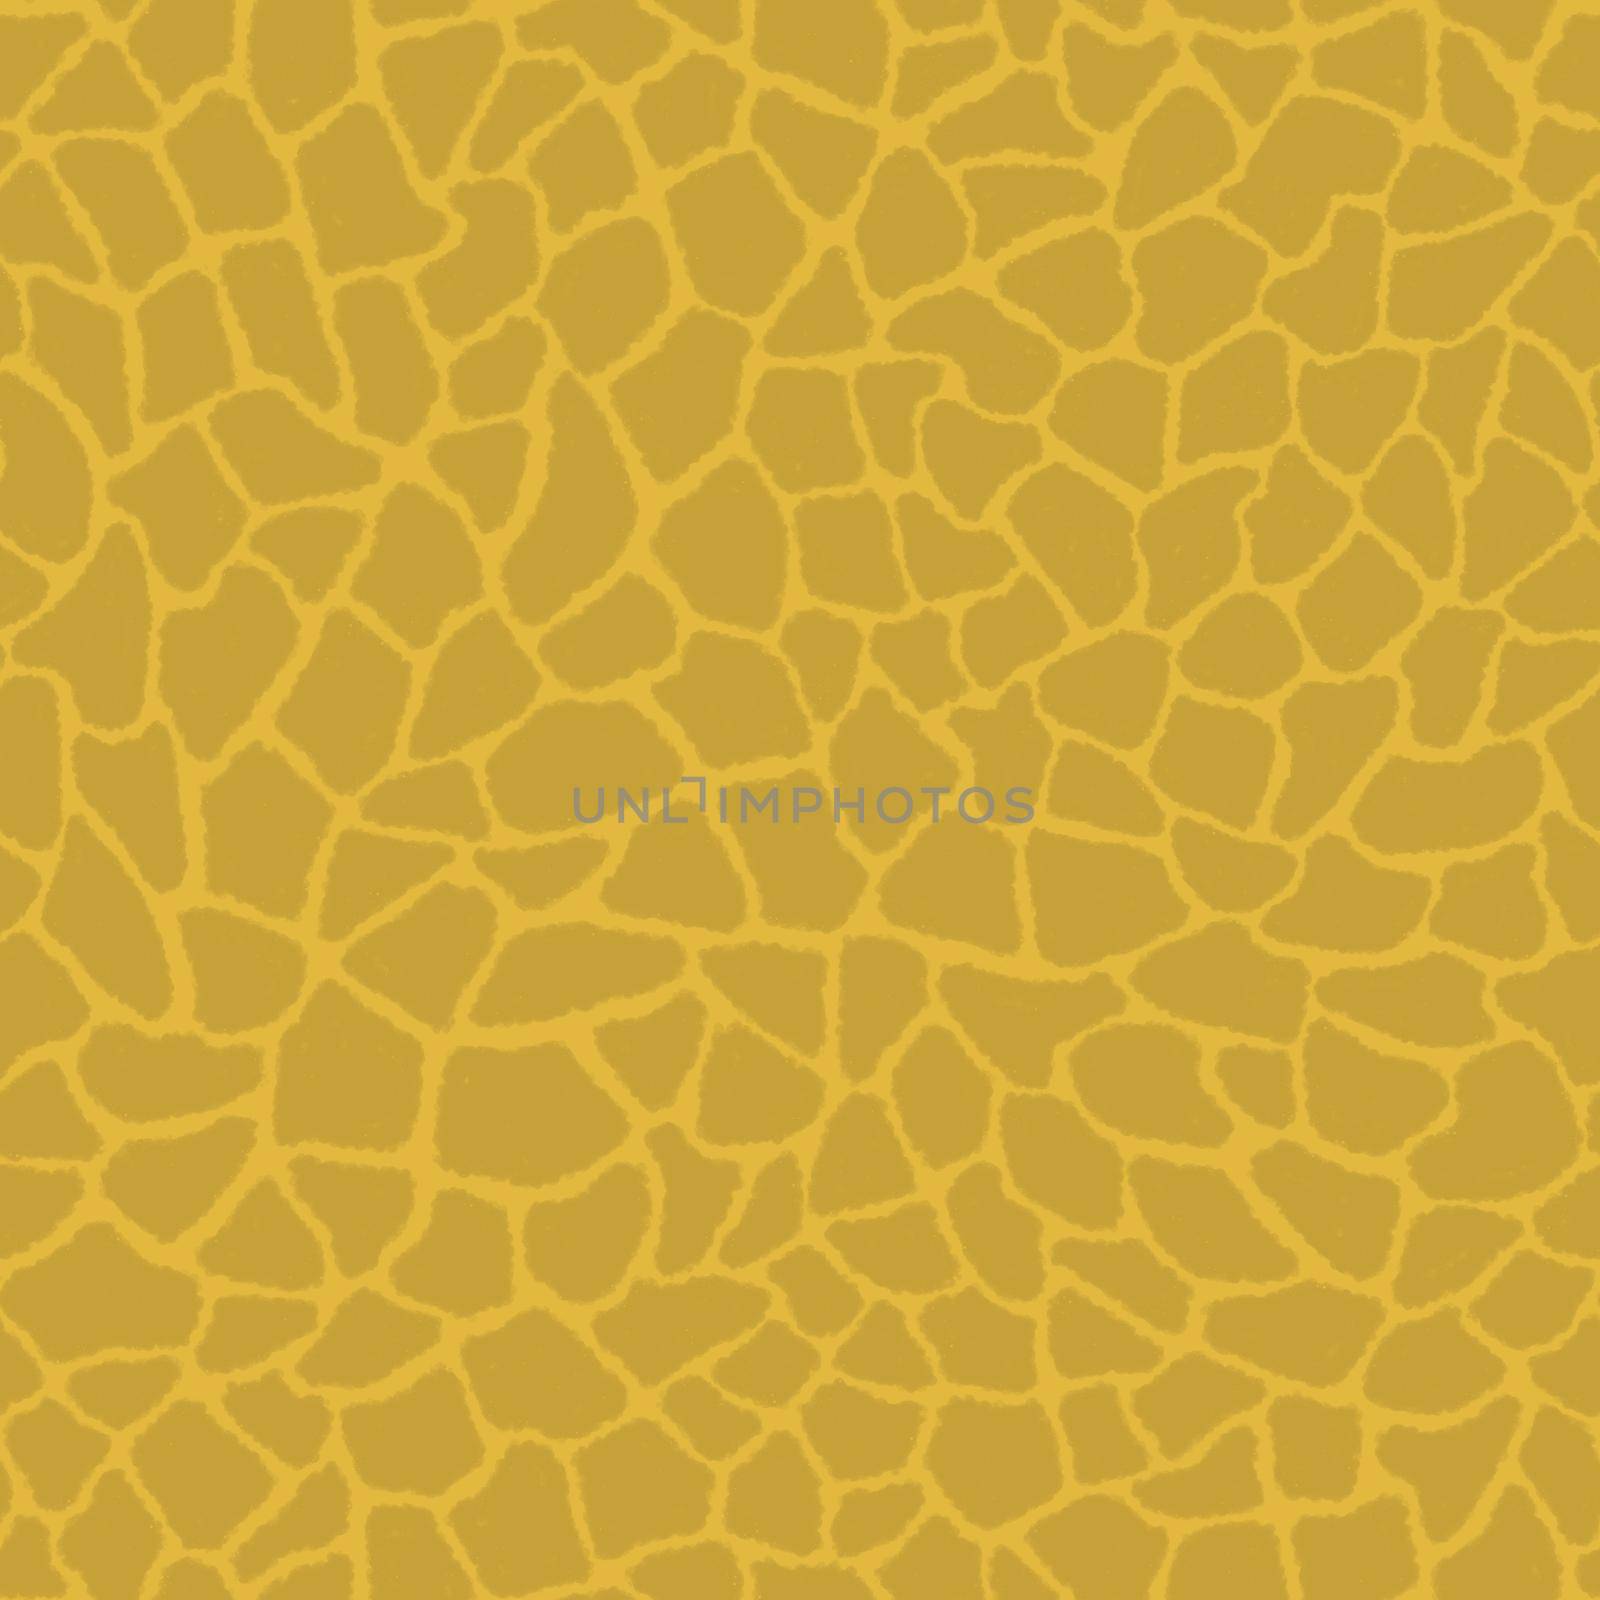 Giraffe skin color seamless pattern with fashion animal print for continuous replicate. Chaotic mosaic gray pieces on mustard background. Wrapping paper, funny textile fabric print,design,decor by Angelsmoon